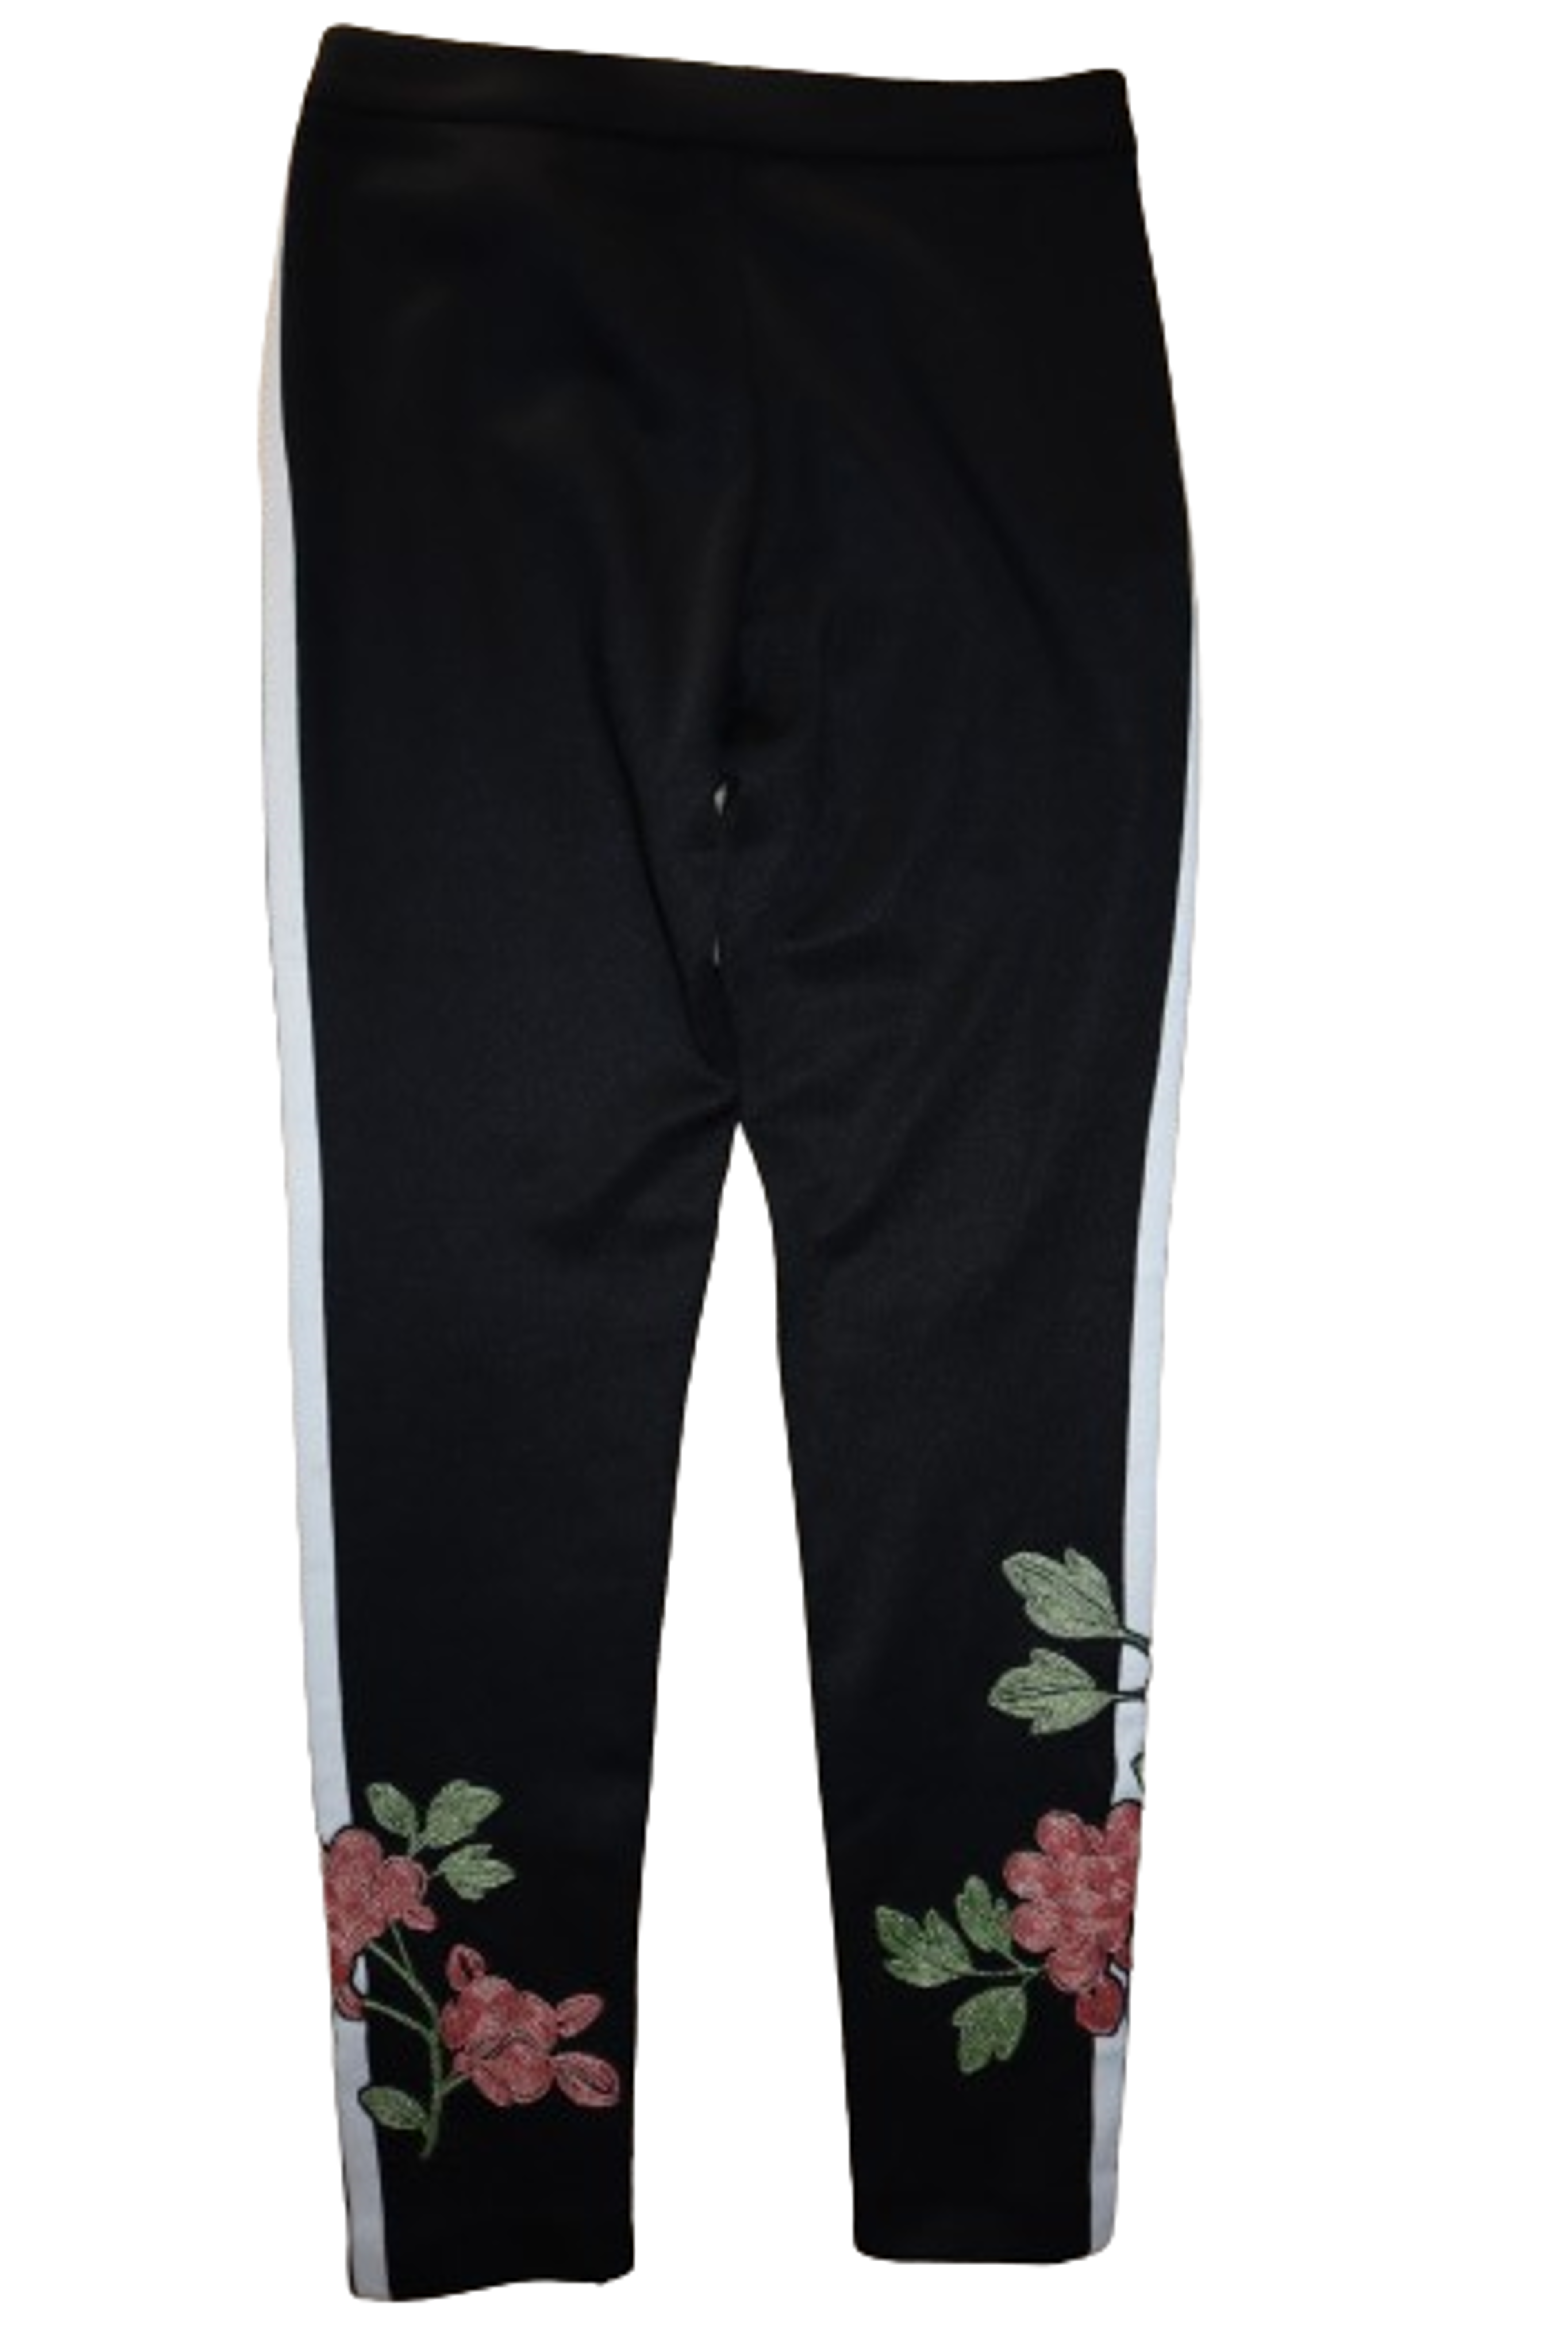 Alternate View 1 of Gucci Girls pants